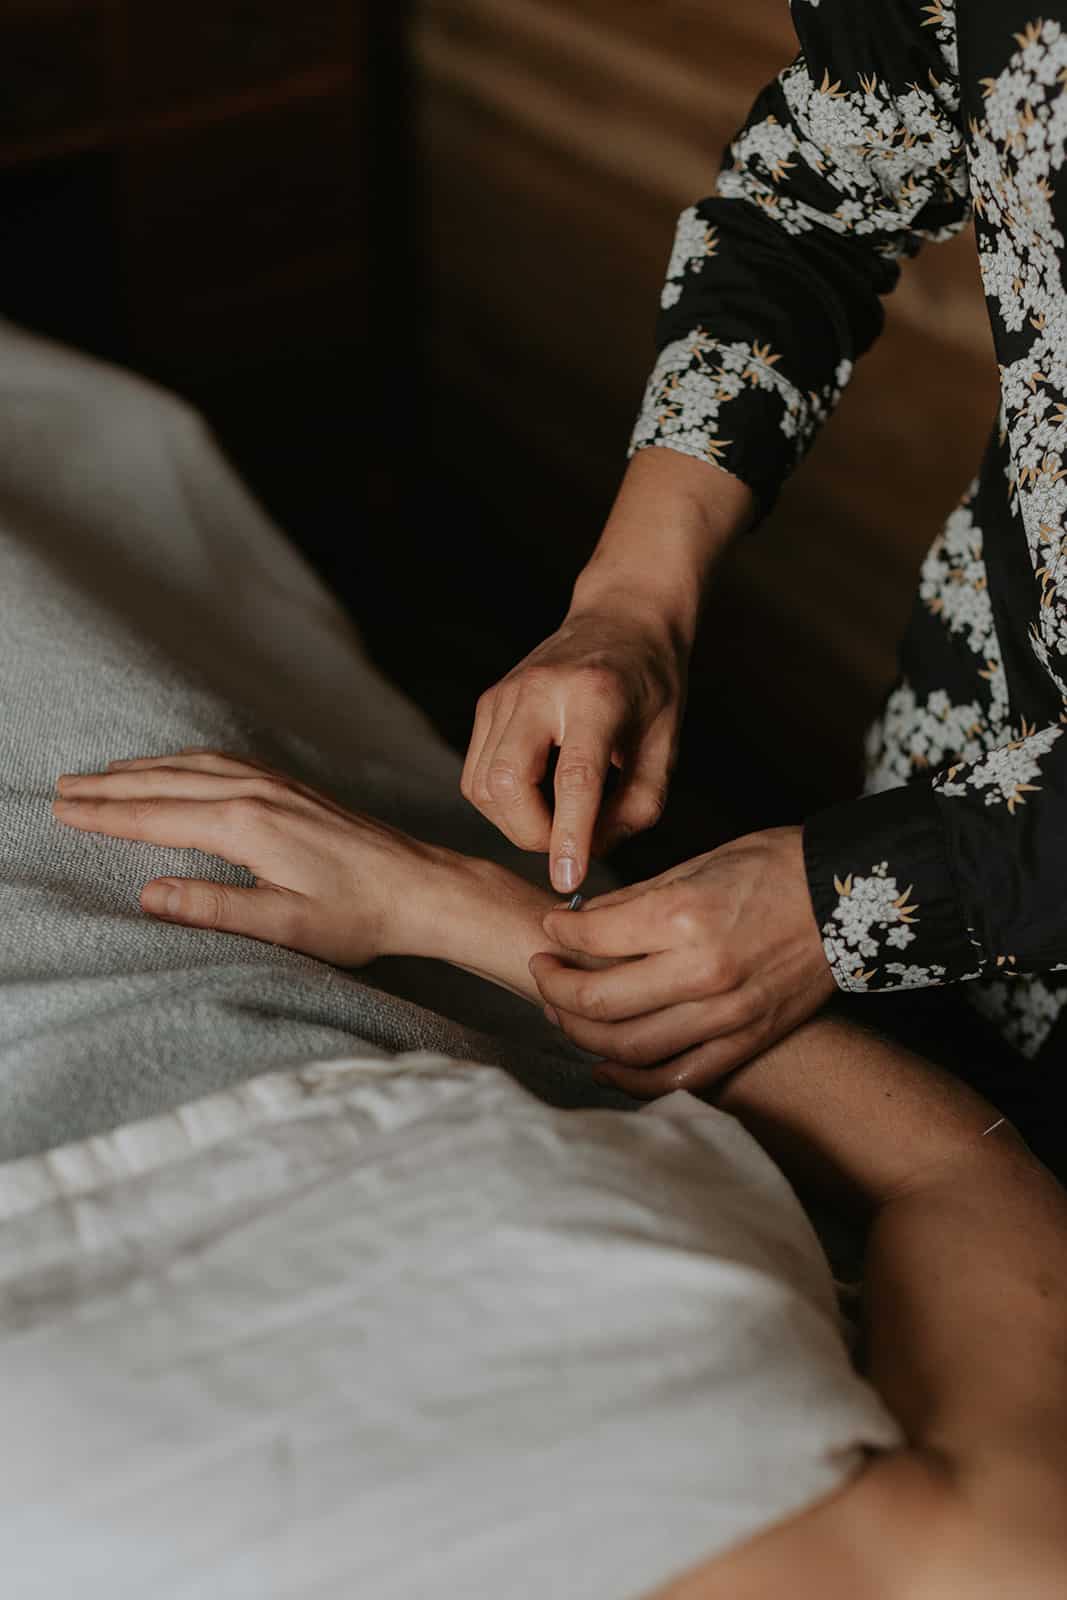 Acupuncture needles inserted along the arm's meridian points to enhance fertility, illustrating TCM's holistic healing approach.